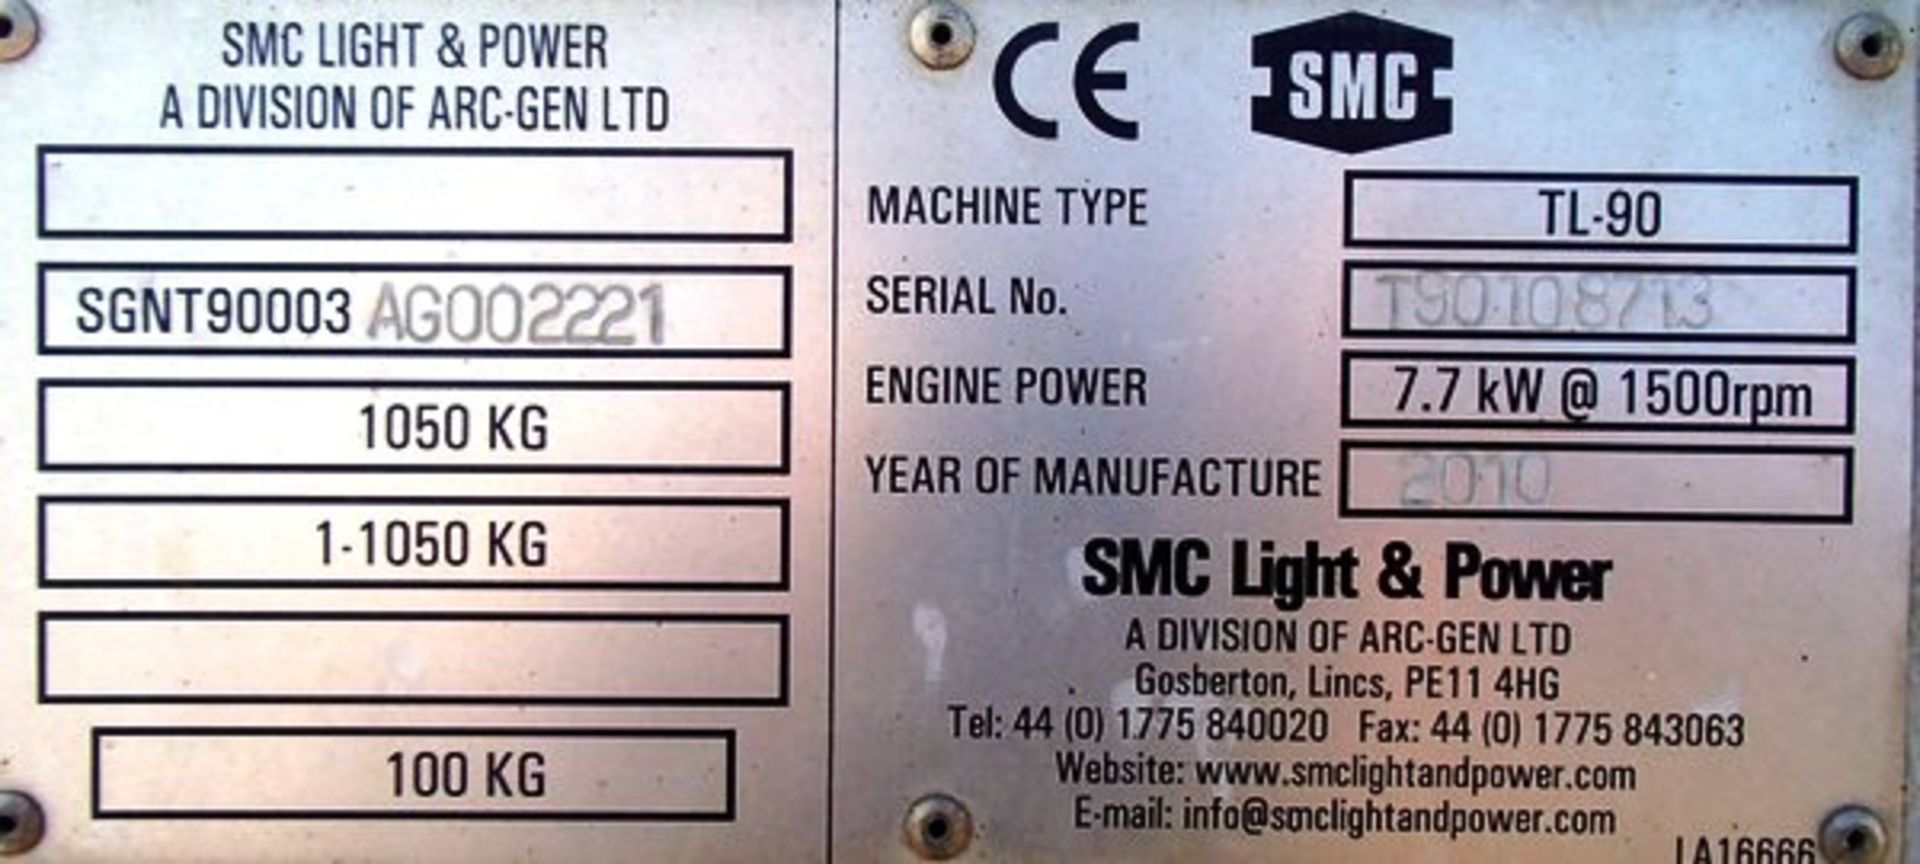 2010 SMC TL-90. SN T90108713 TOWABLE TOWER LIGHTS, ENGINE POWER 7.7KW @ 1500RPM. 992 HRS (NOT VERIFI - Image 6 of 6